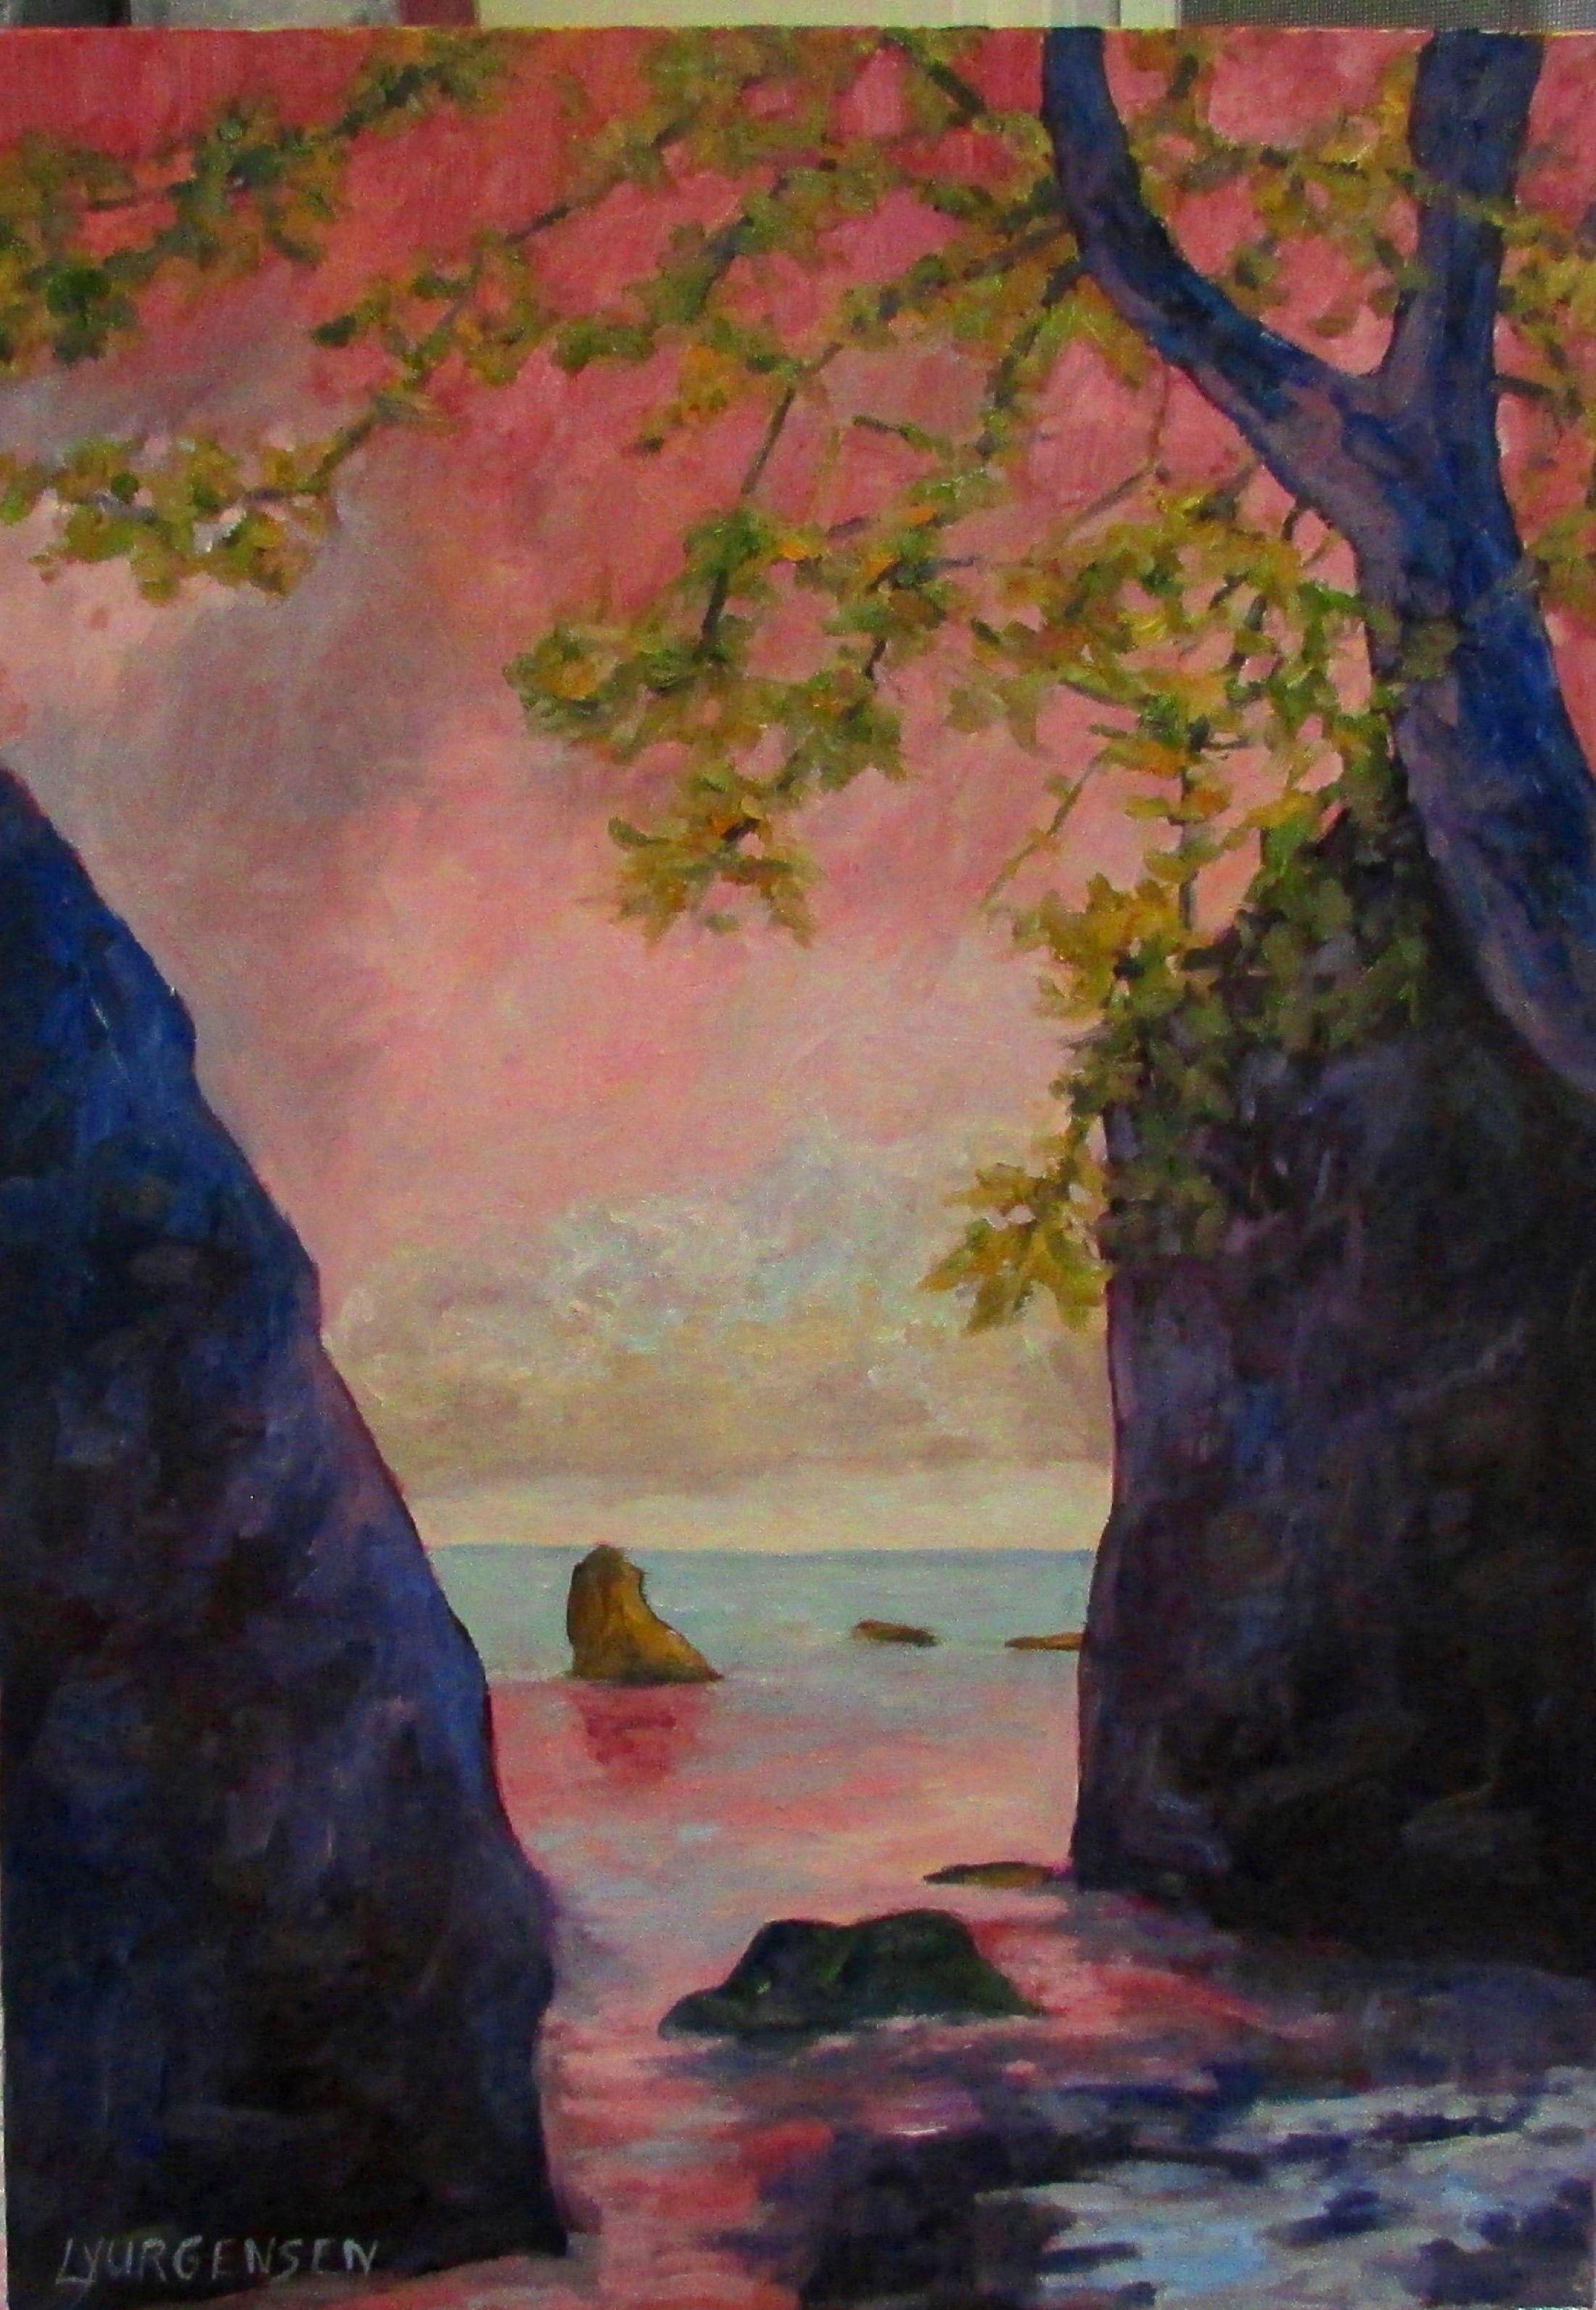 I took this reference at one of the stunning beaches on the West Coast of Vancouver Island.  The view is looking out onto the expanse of the Pacific Ocean.  This painting is lovely with hues of purple and pink.  The sides of the slim canvas have